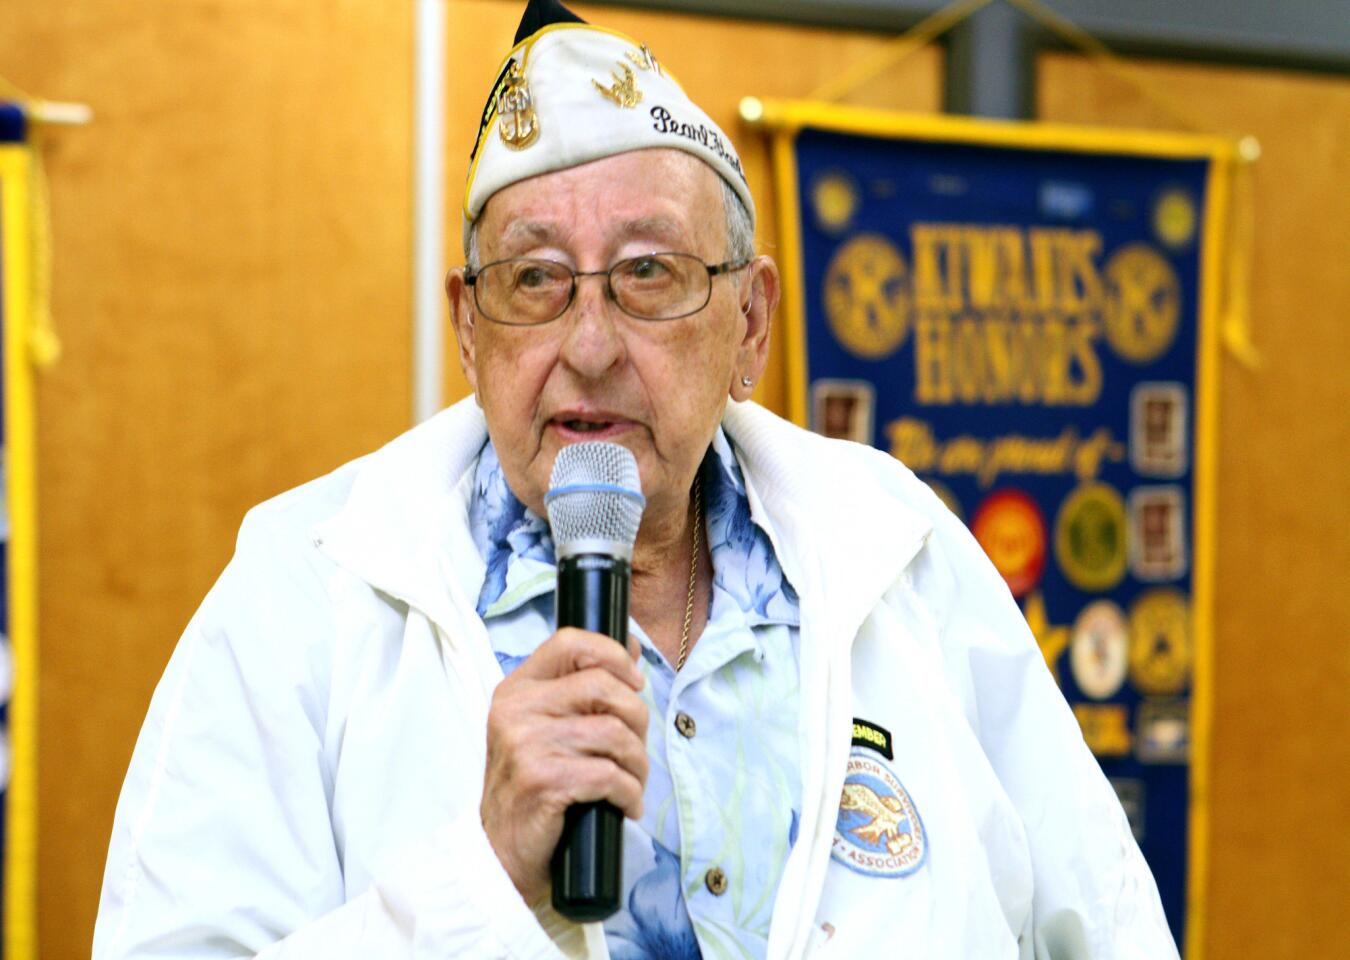 World War II Pearl Harbor survivor and US Navy man Jack Rogo speaks at the Burbank Kiwanis luncheon at the Burbank YMCA on Wednesday, Dec. 21, 2016. Rogo told the story of his survival during the attack on Pearl Harbor by Japanese forces during World War II.